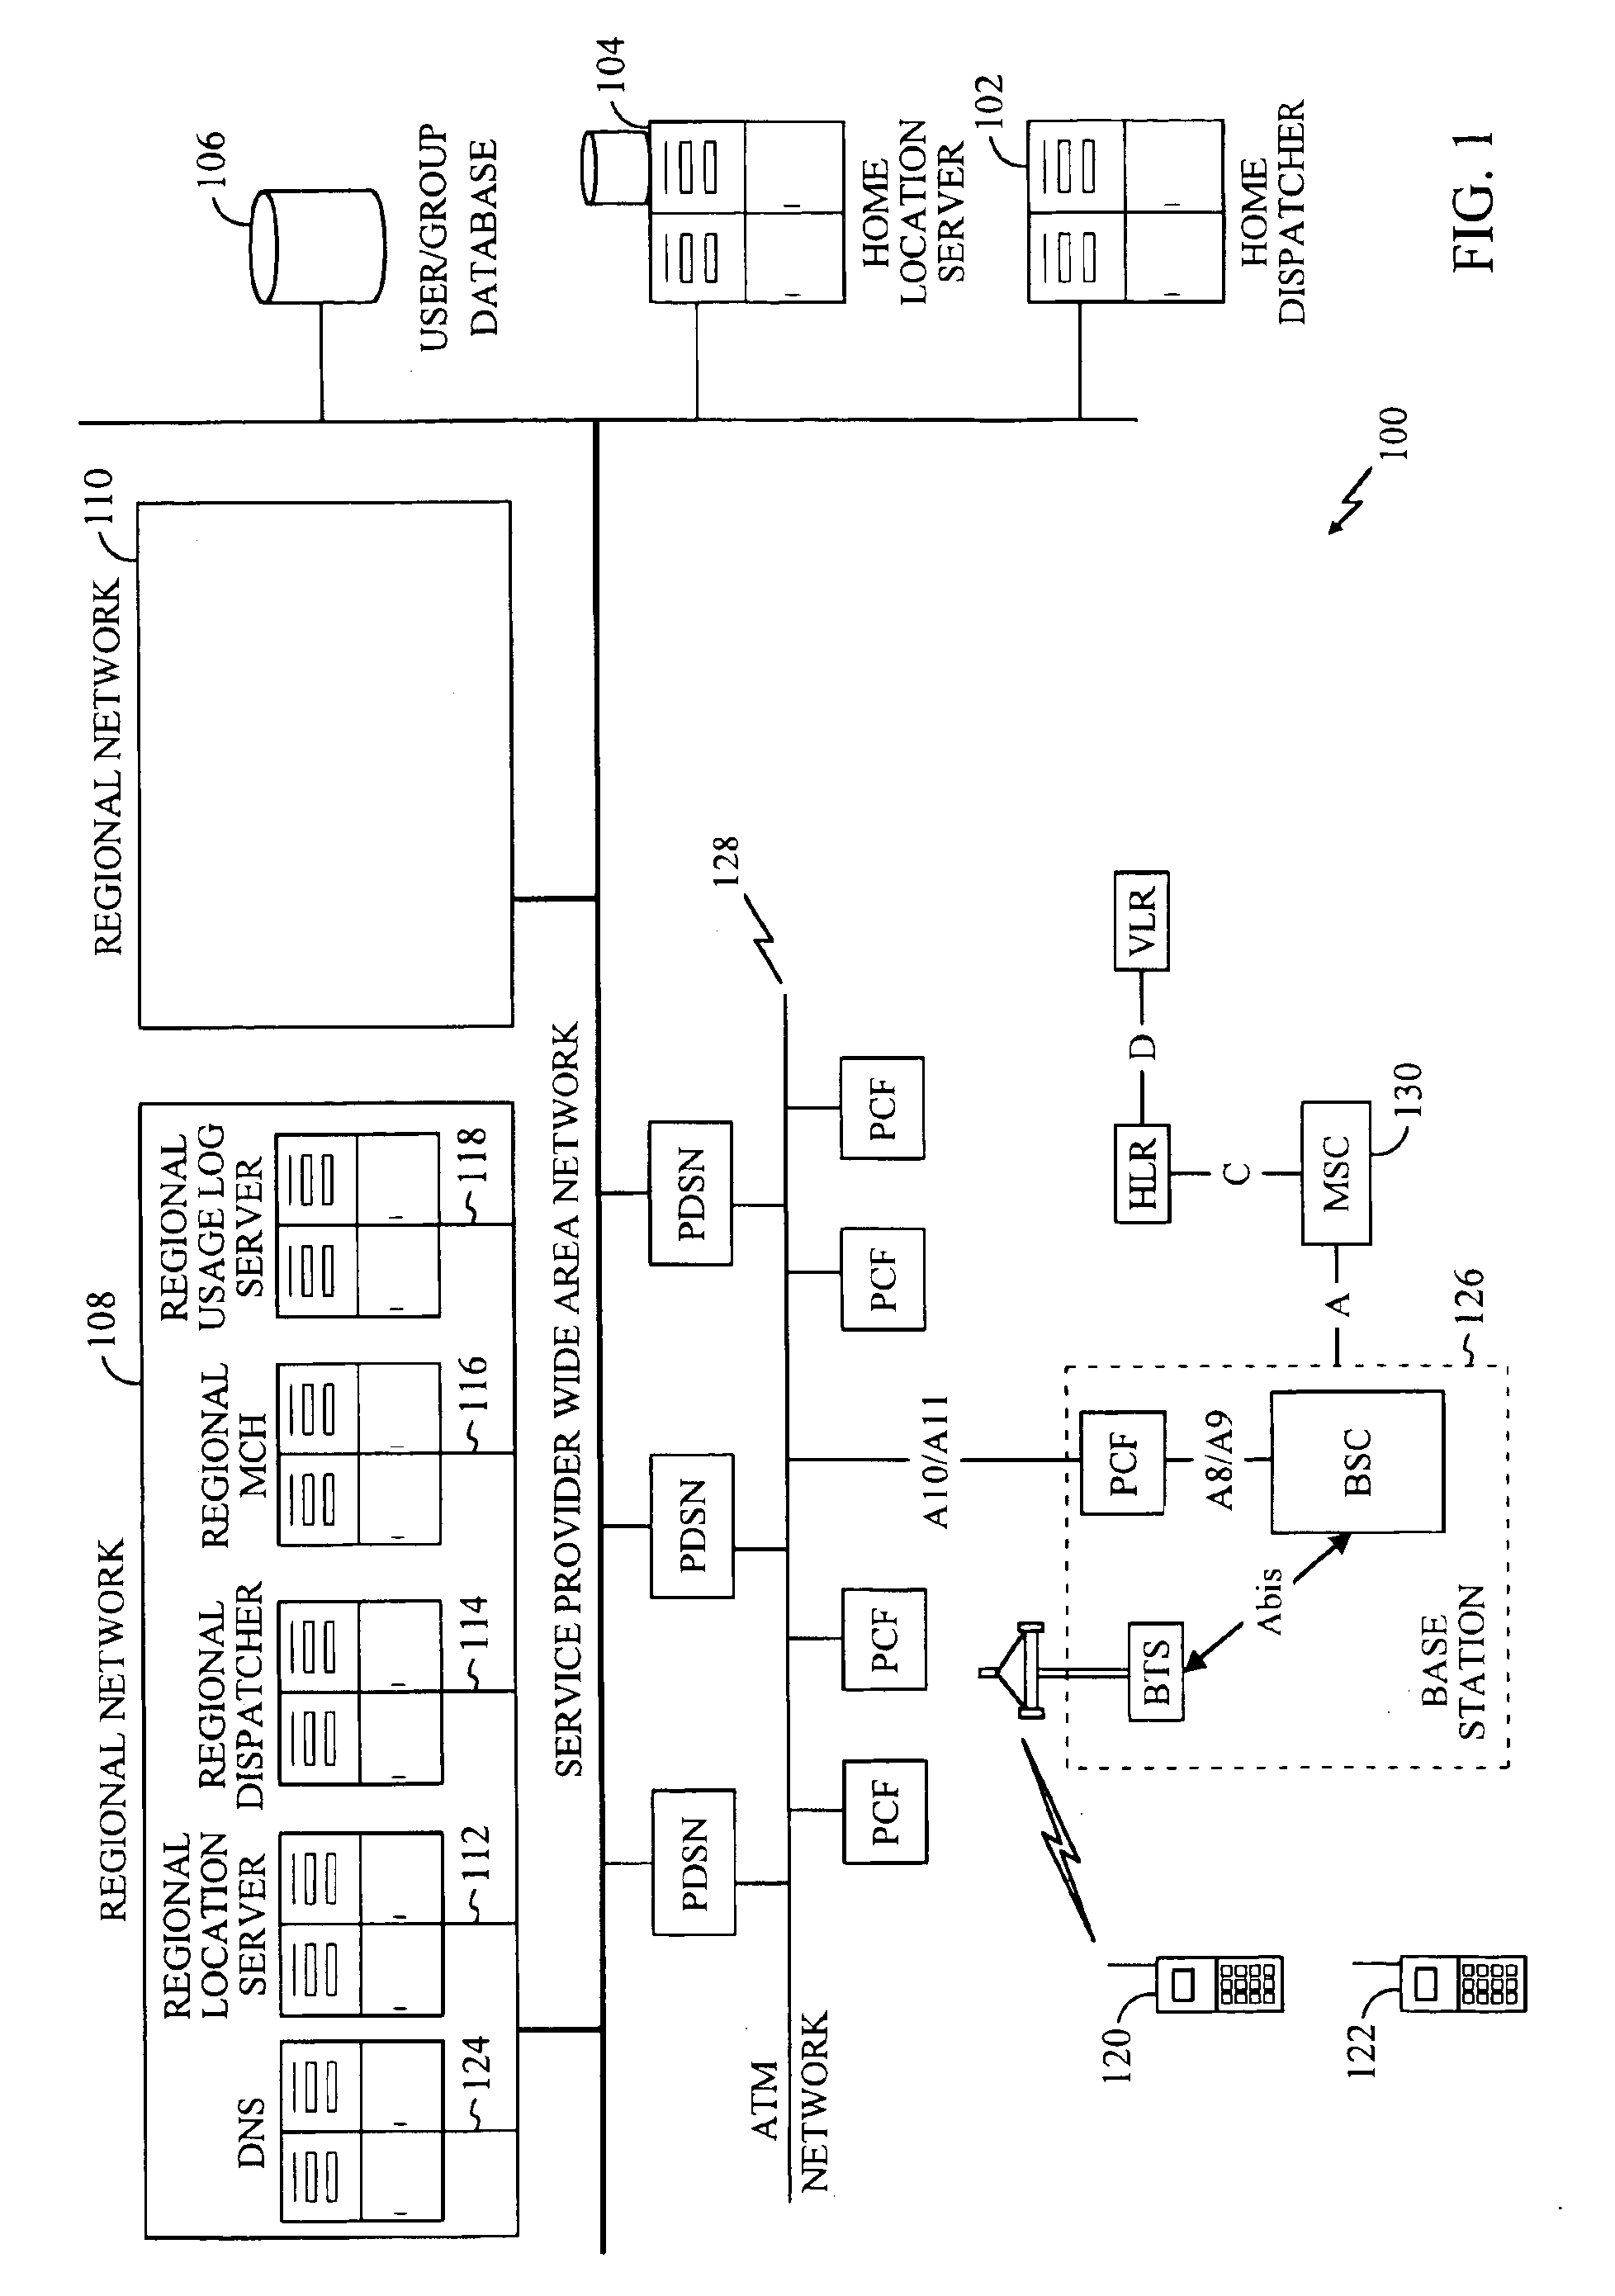 Communication device for joining a user to a group call in a group communication network